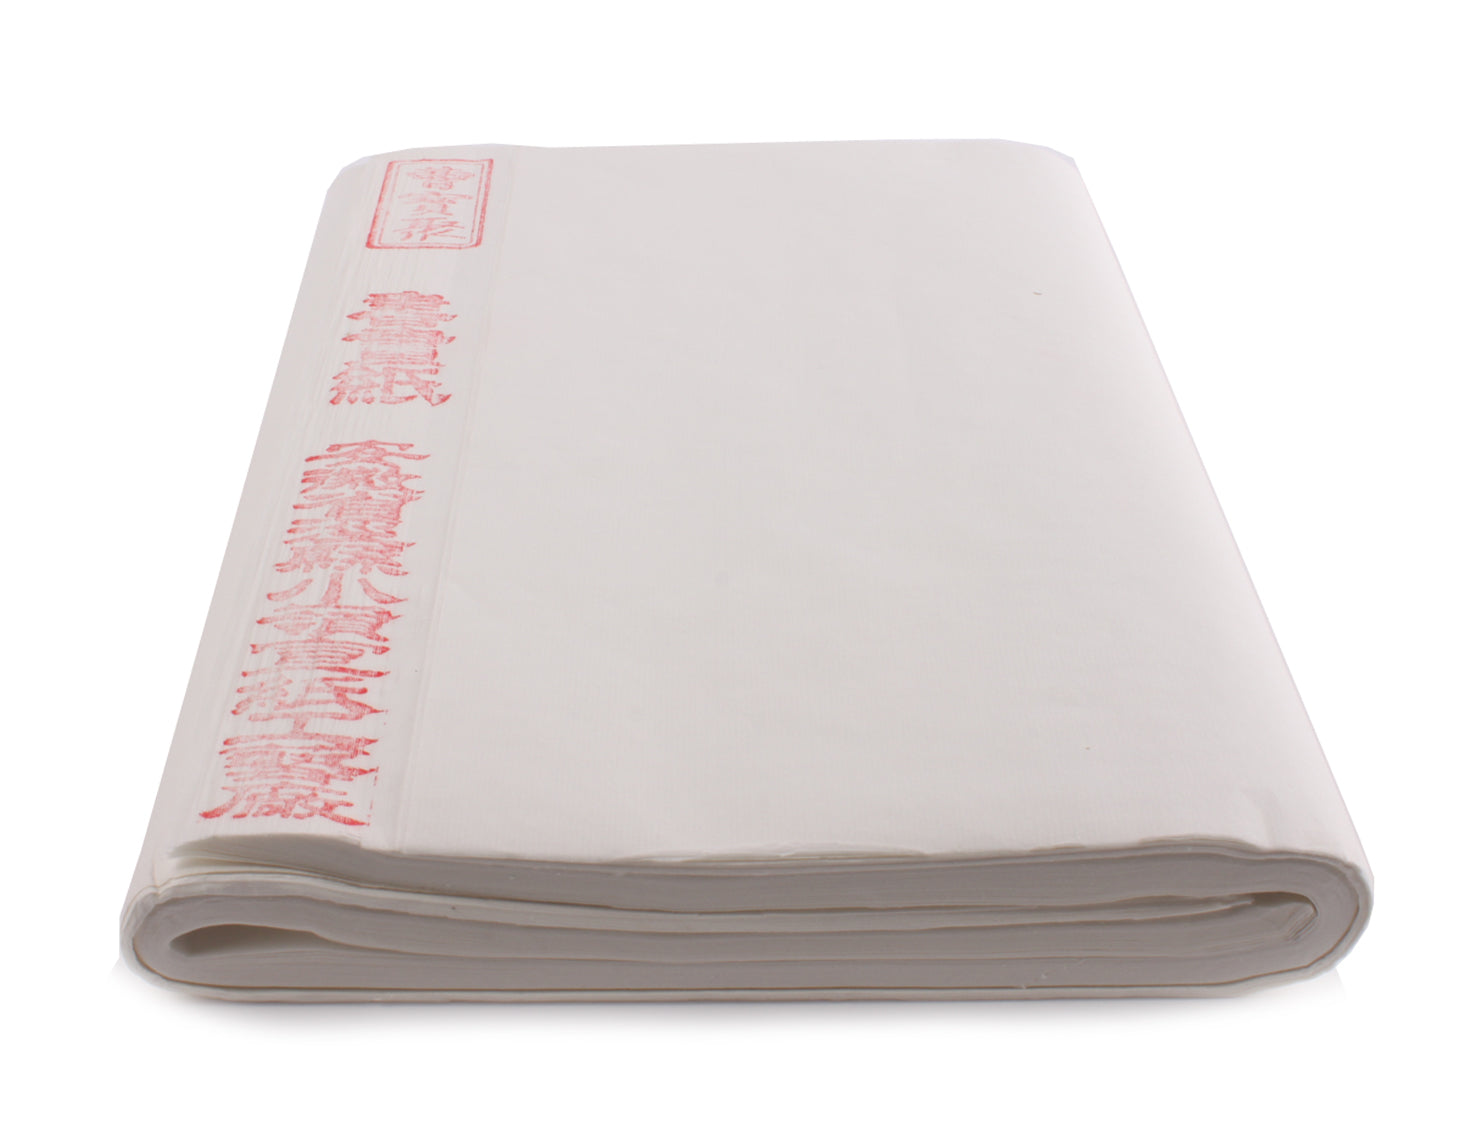 Handmade Decorative Paper Printable White Writing Letter Paper Rice Paper Chinese Calligraphy Paper,25 Sheets, Size: 29